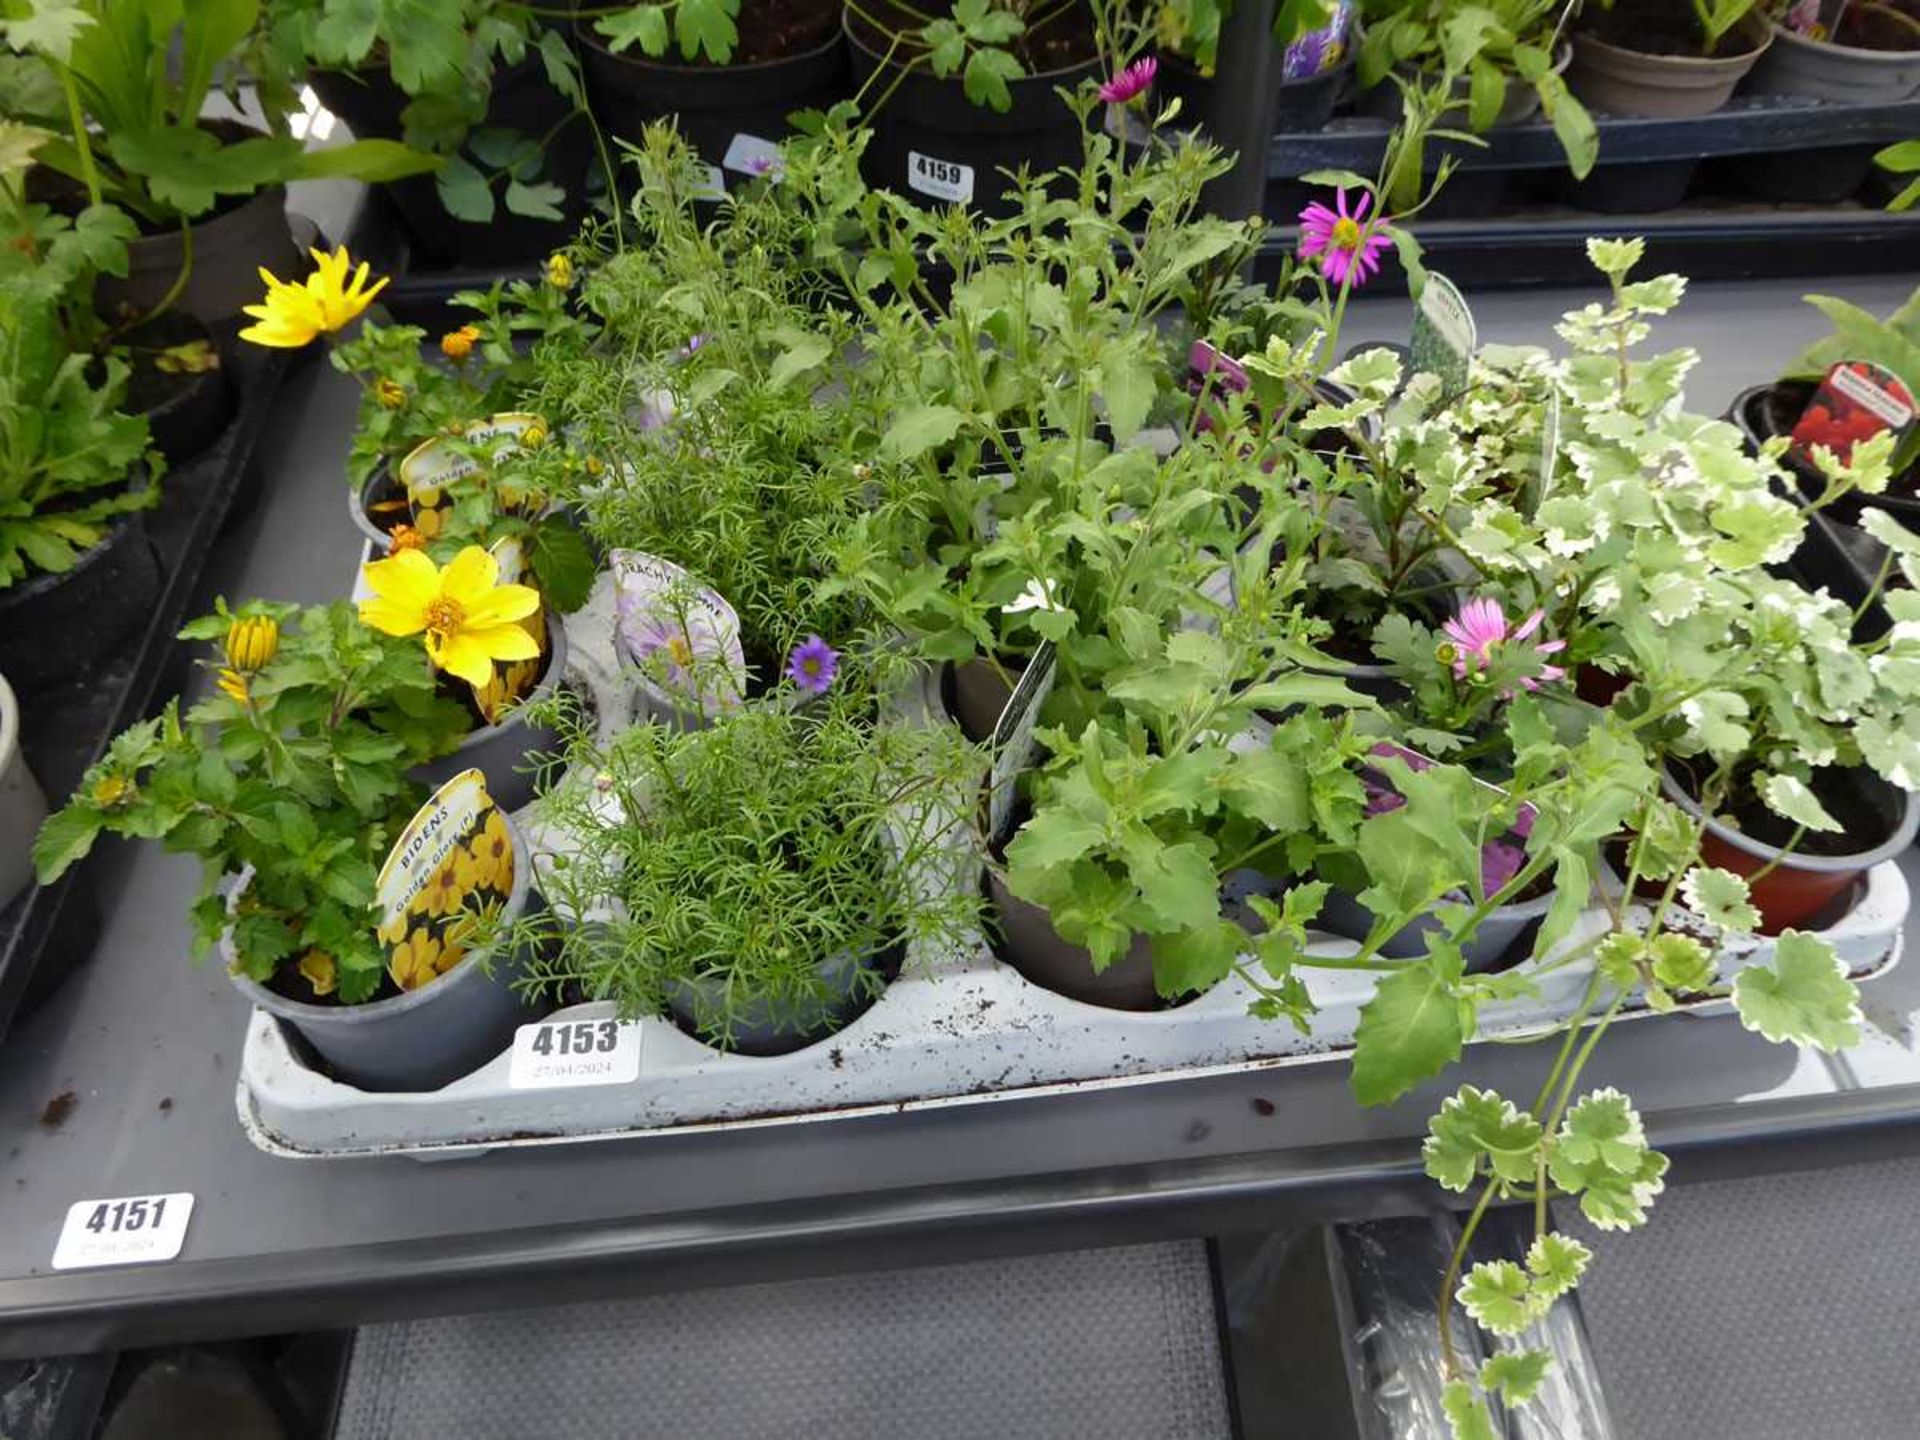 Tray of various plants including Nepeta, Fresco, Bidens and others